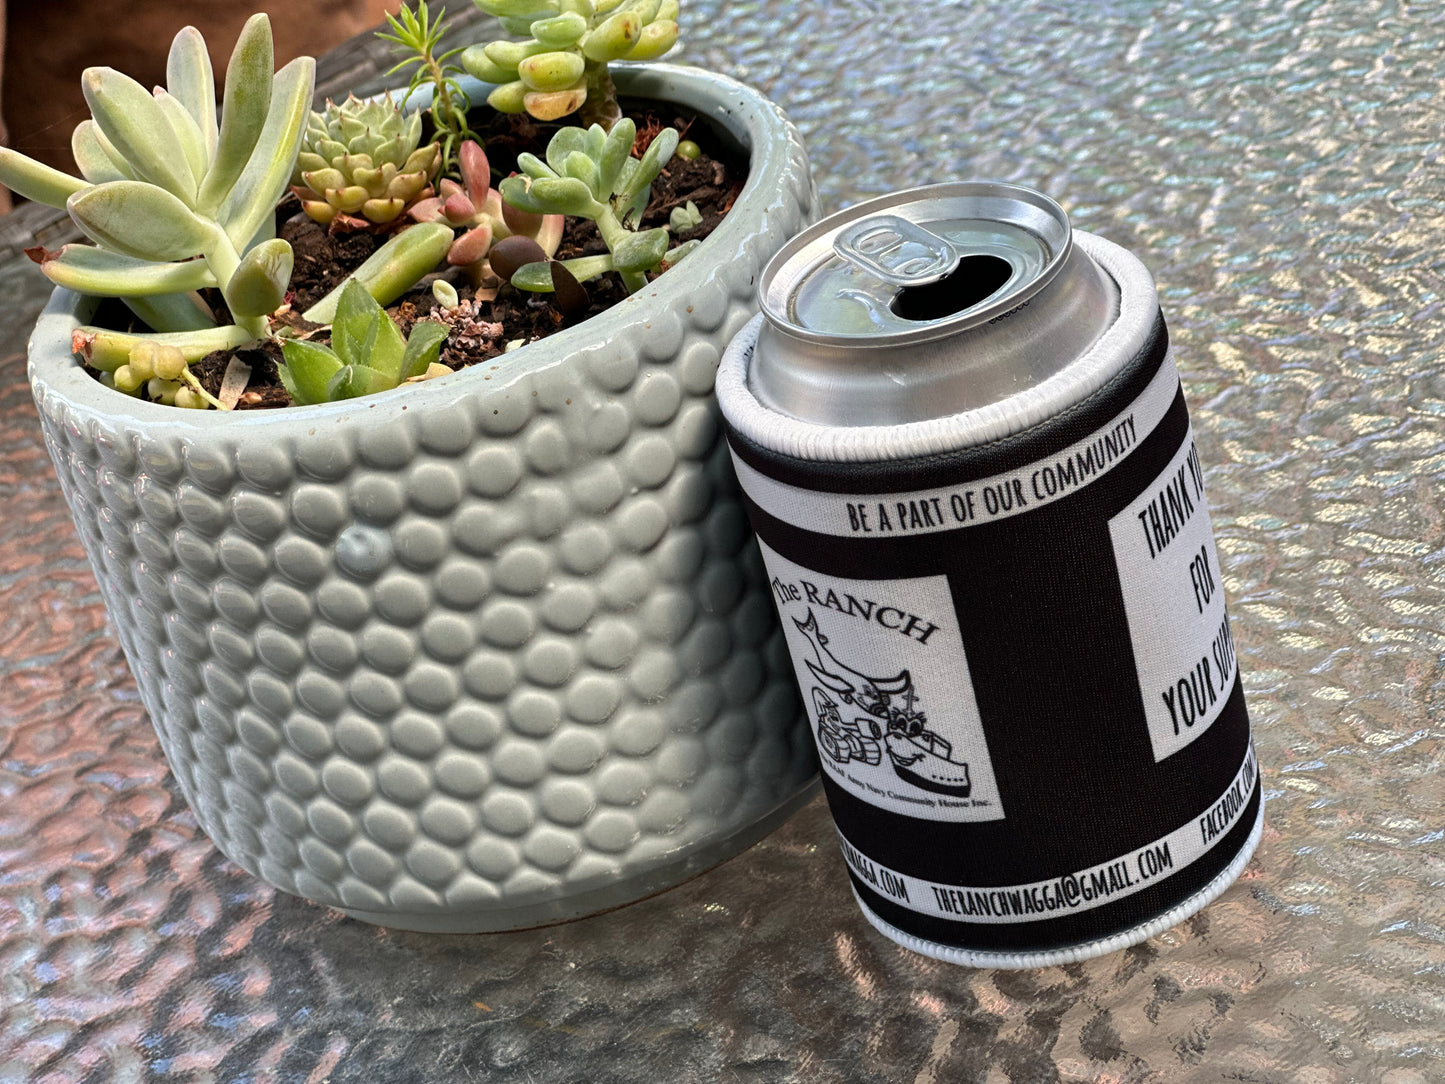 Wine Glass coozies & Can coozies